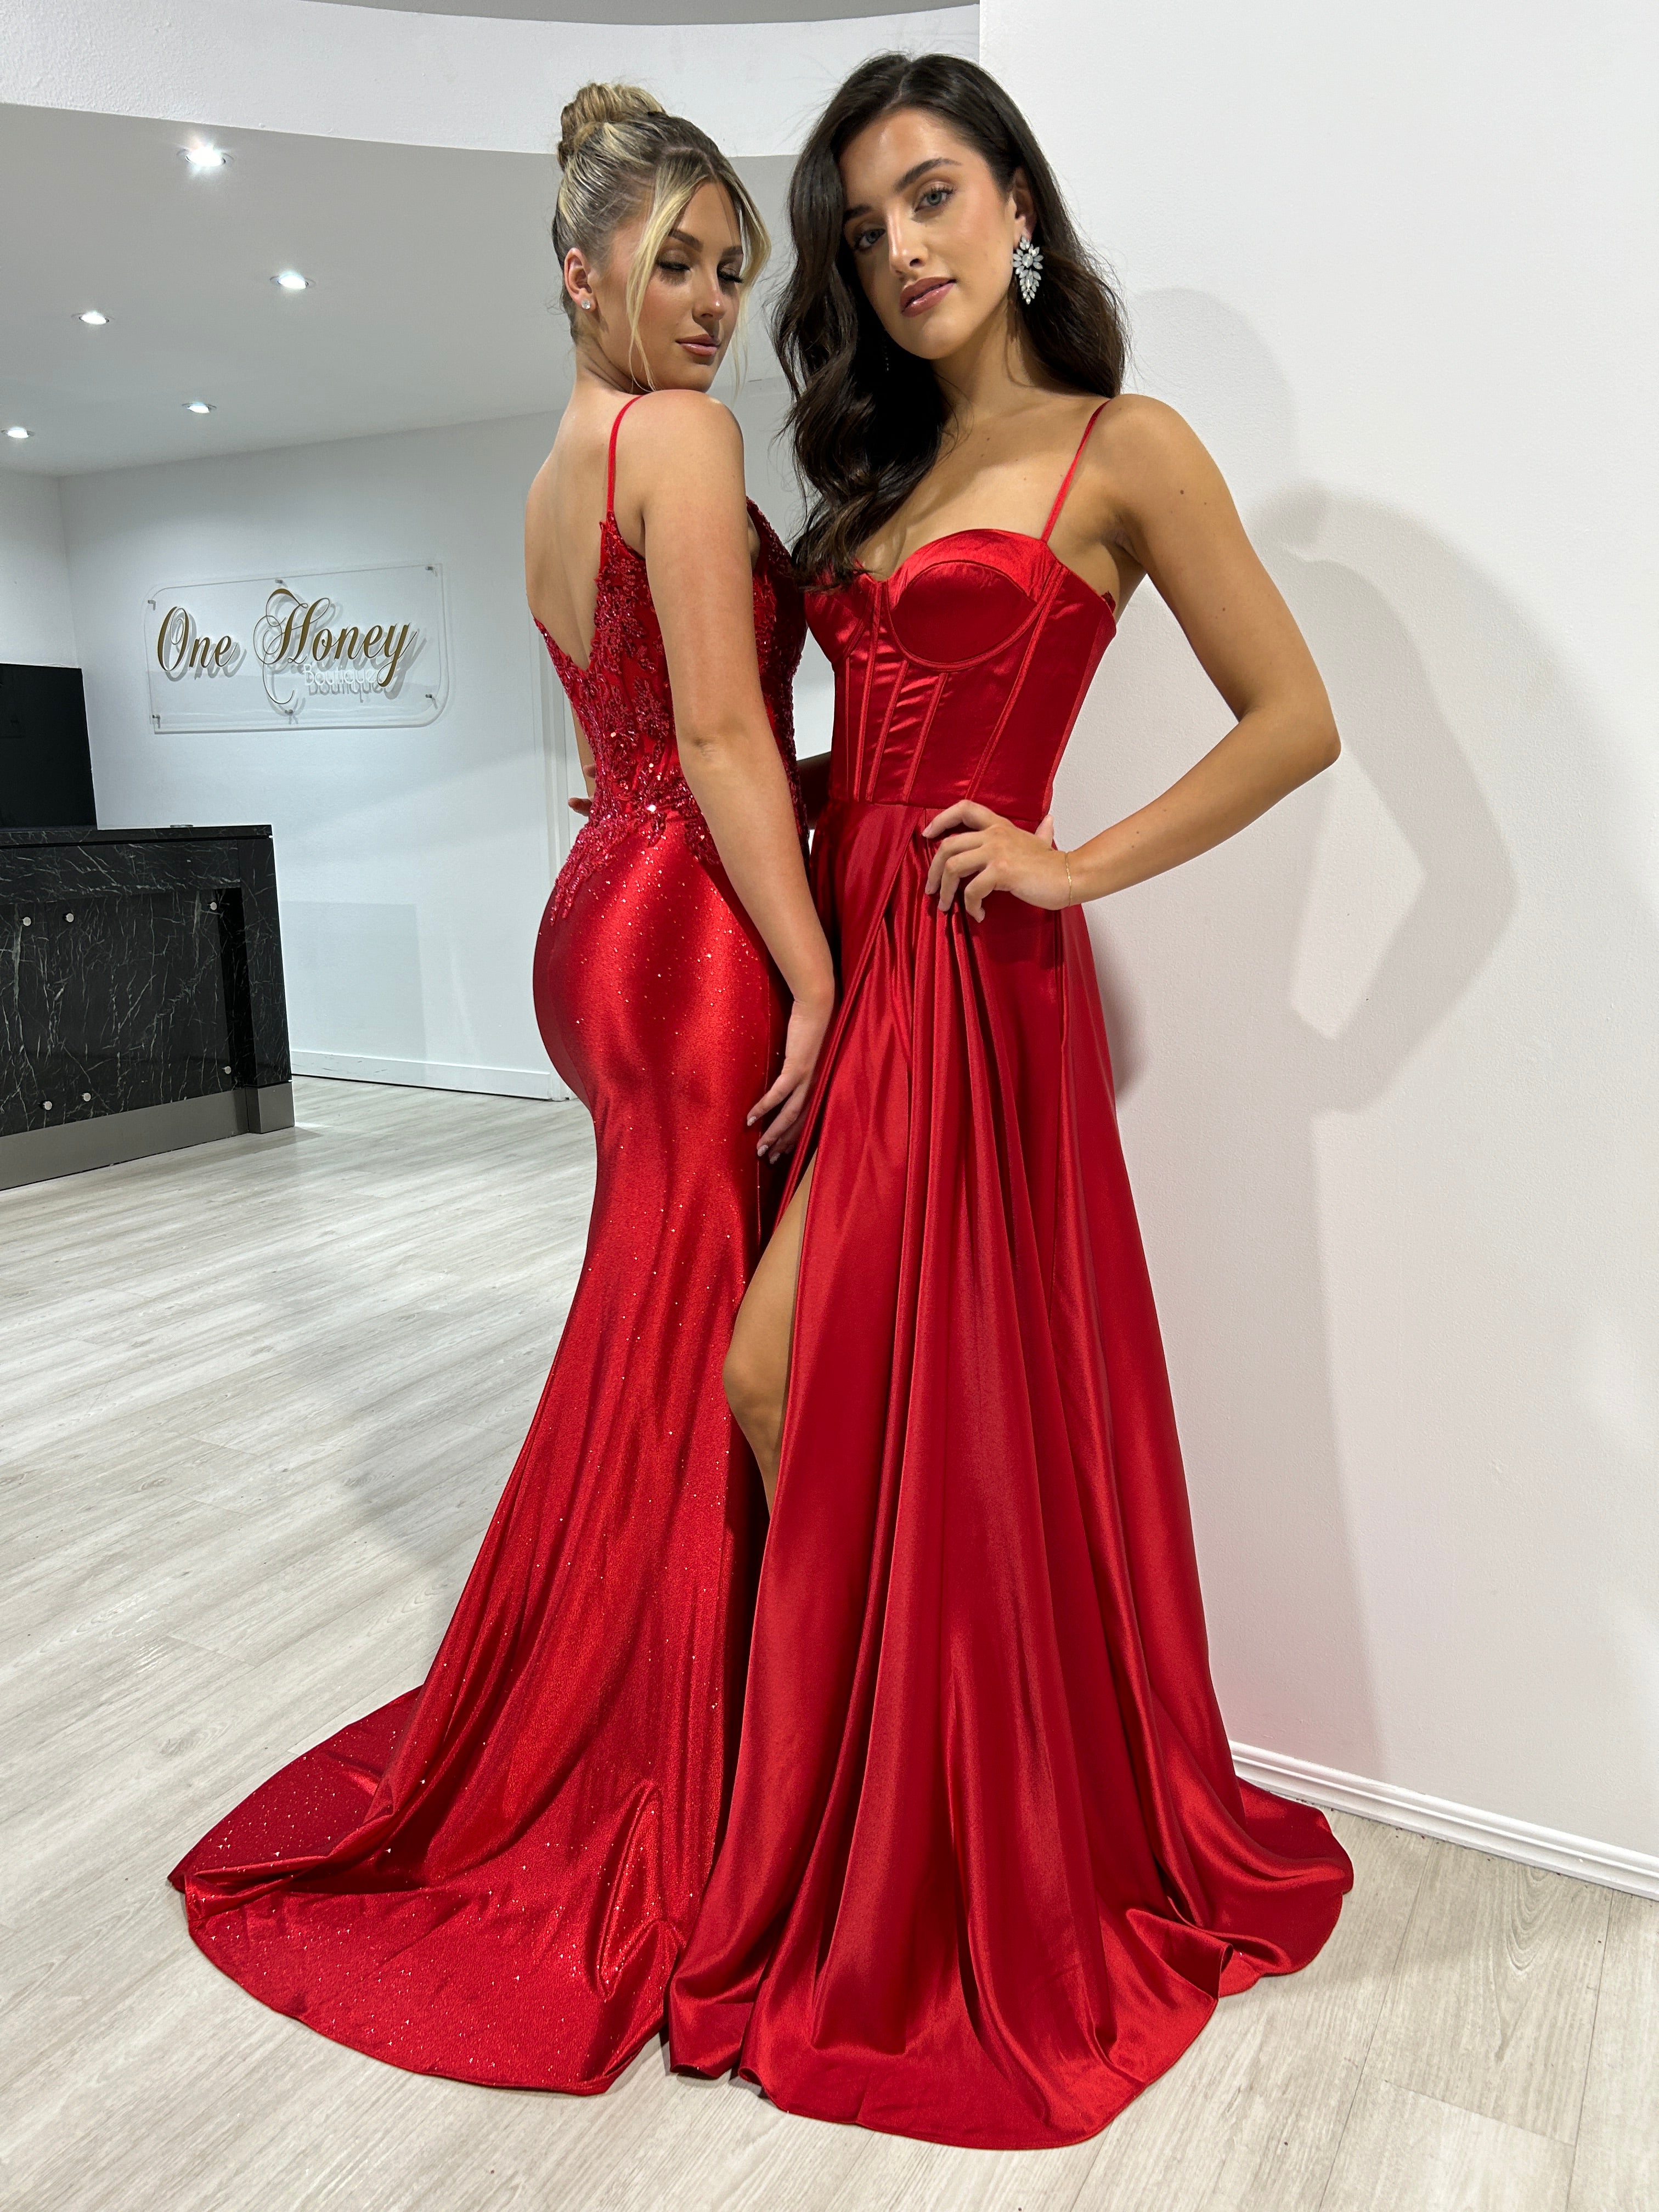 Honey Couture OLYMIA Red Embellished Stretch Glitter Satin Mermaid Formal Dress